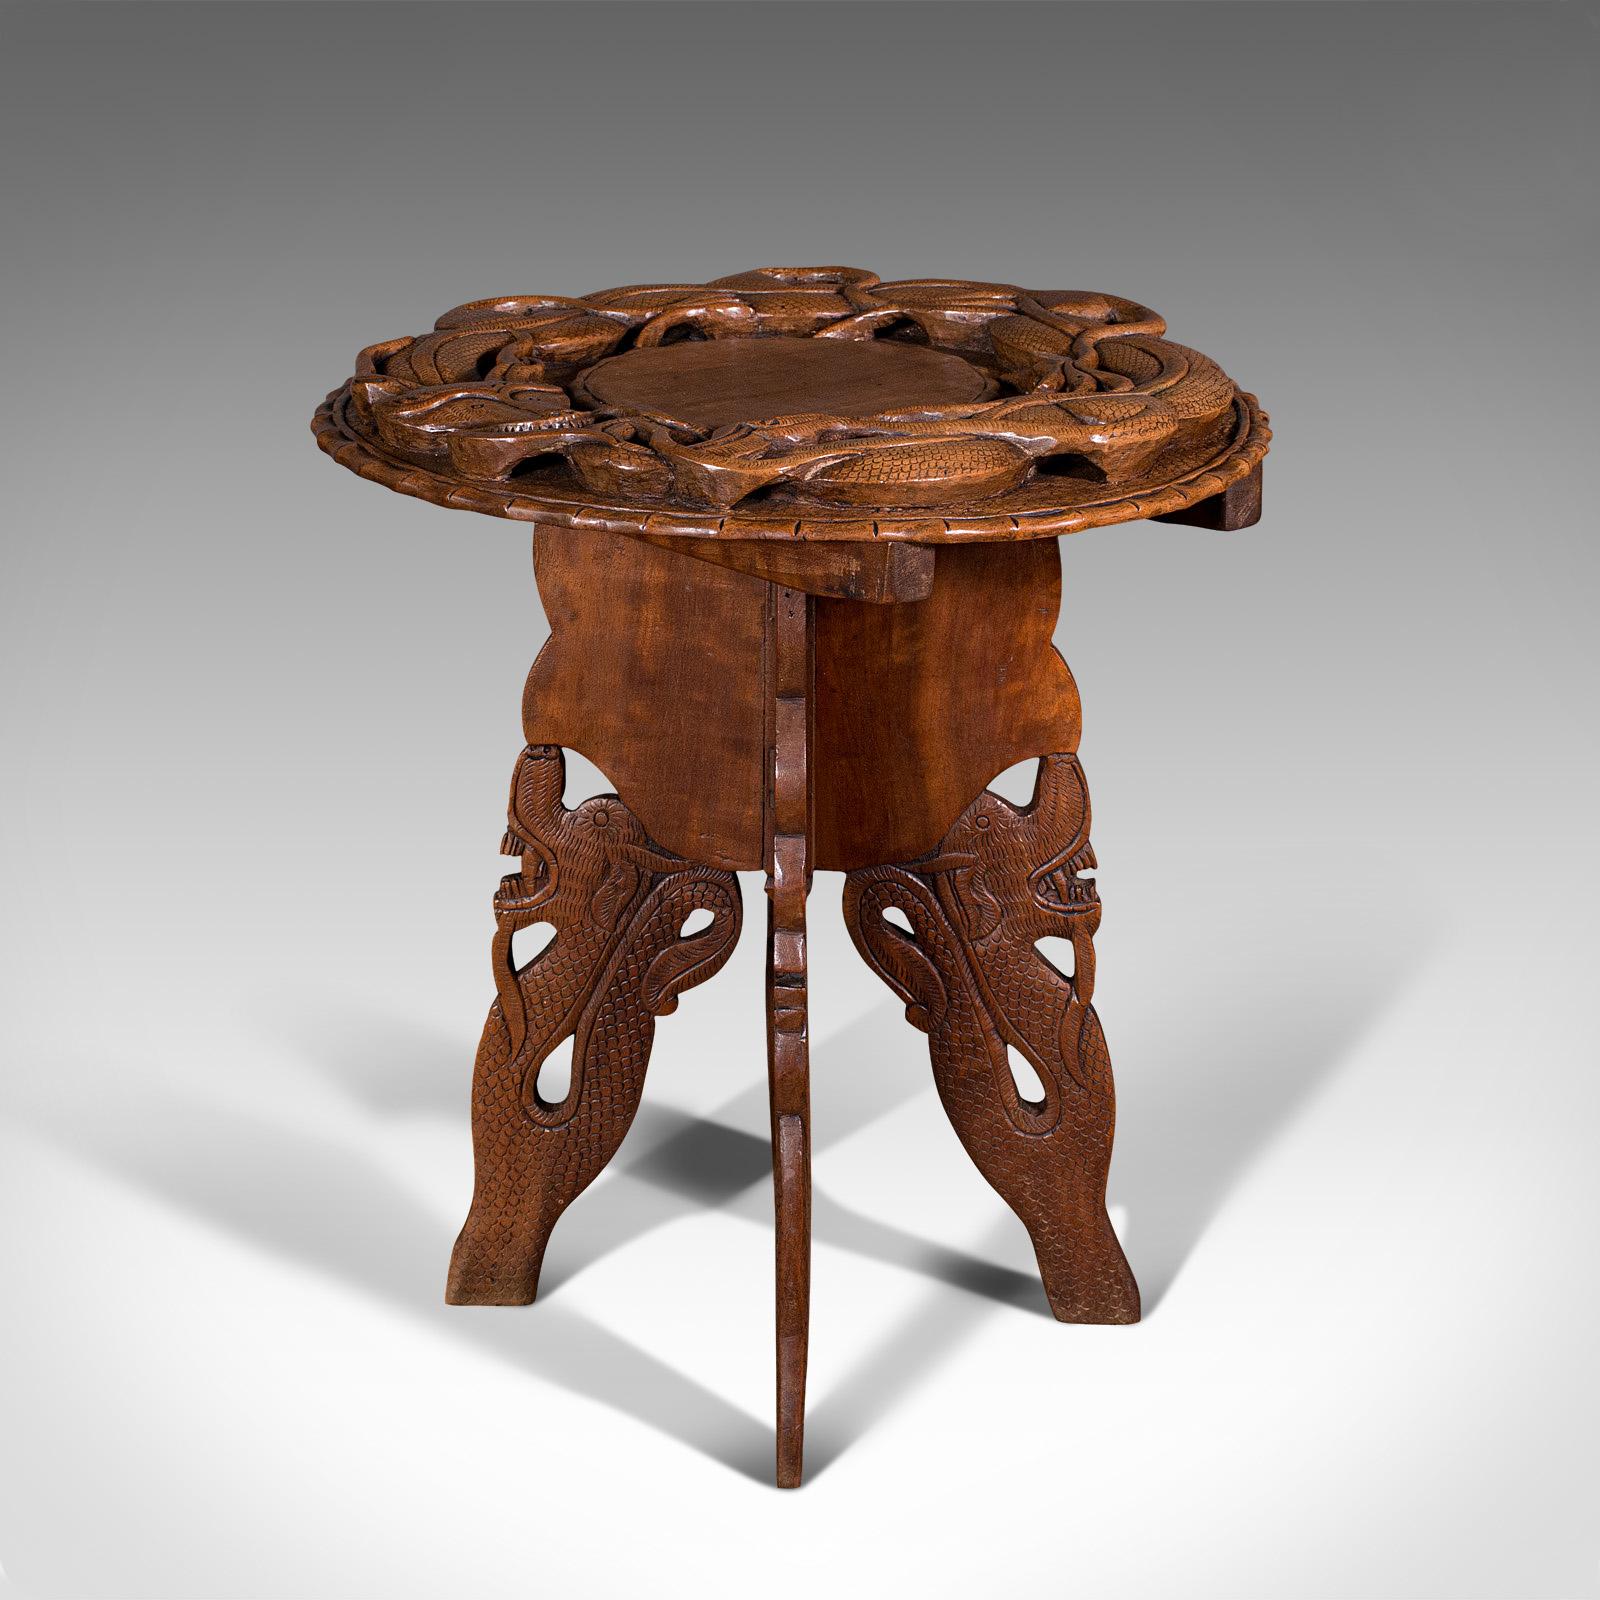 This is a vintage carved occasional table. A Chinese, elm fold away side or lamp table in Art Deco taste, dating to the mid 20th century, circa 1940.

Superb carvings abound to this delightful small table
Displays a desirable aged patina and in